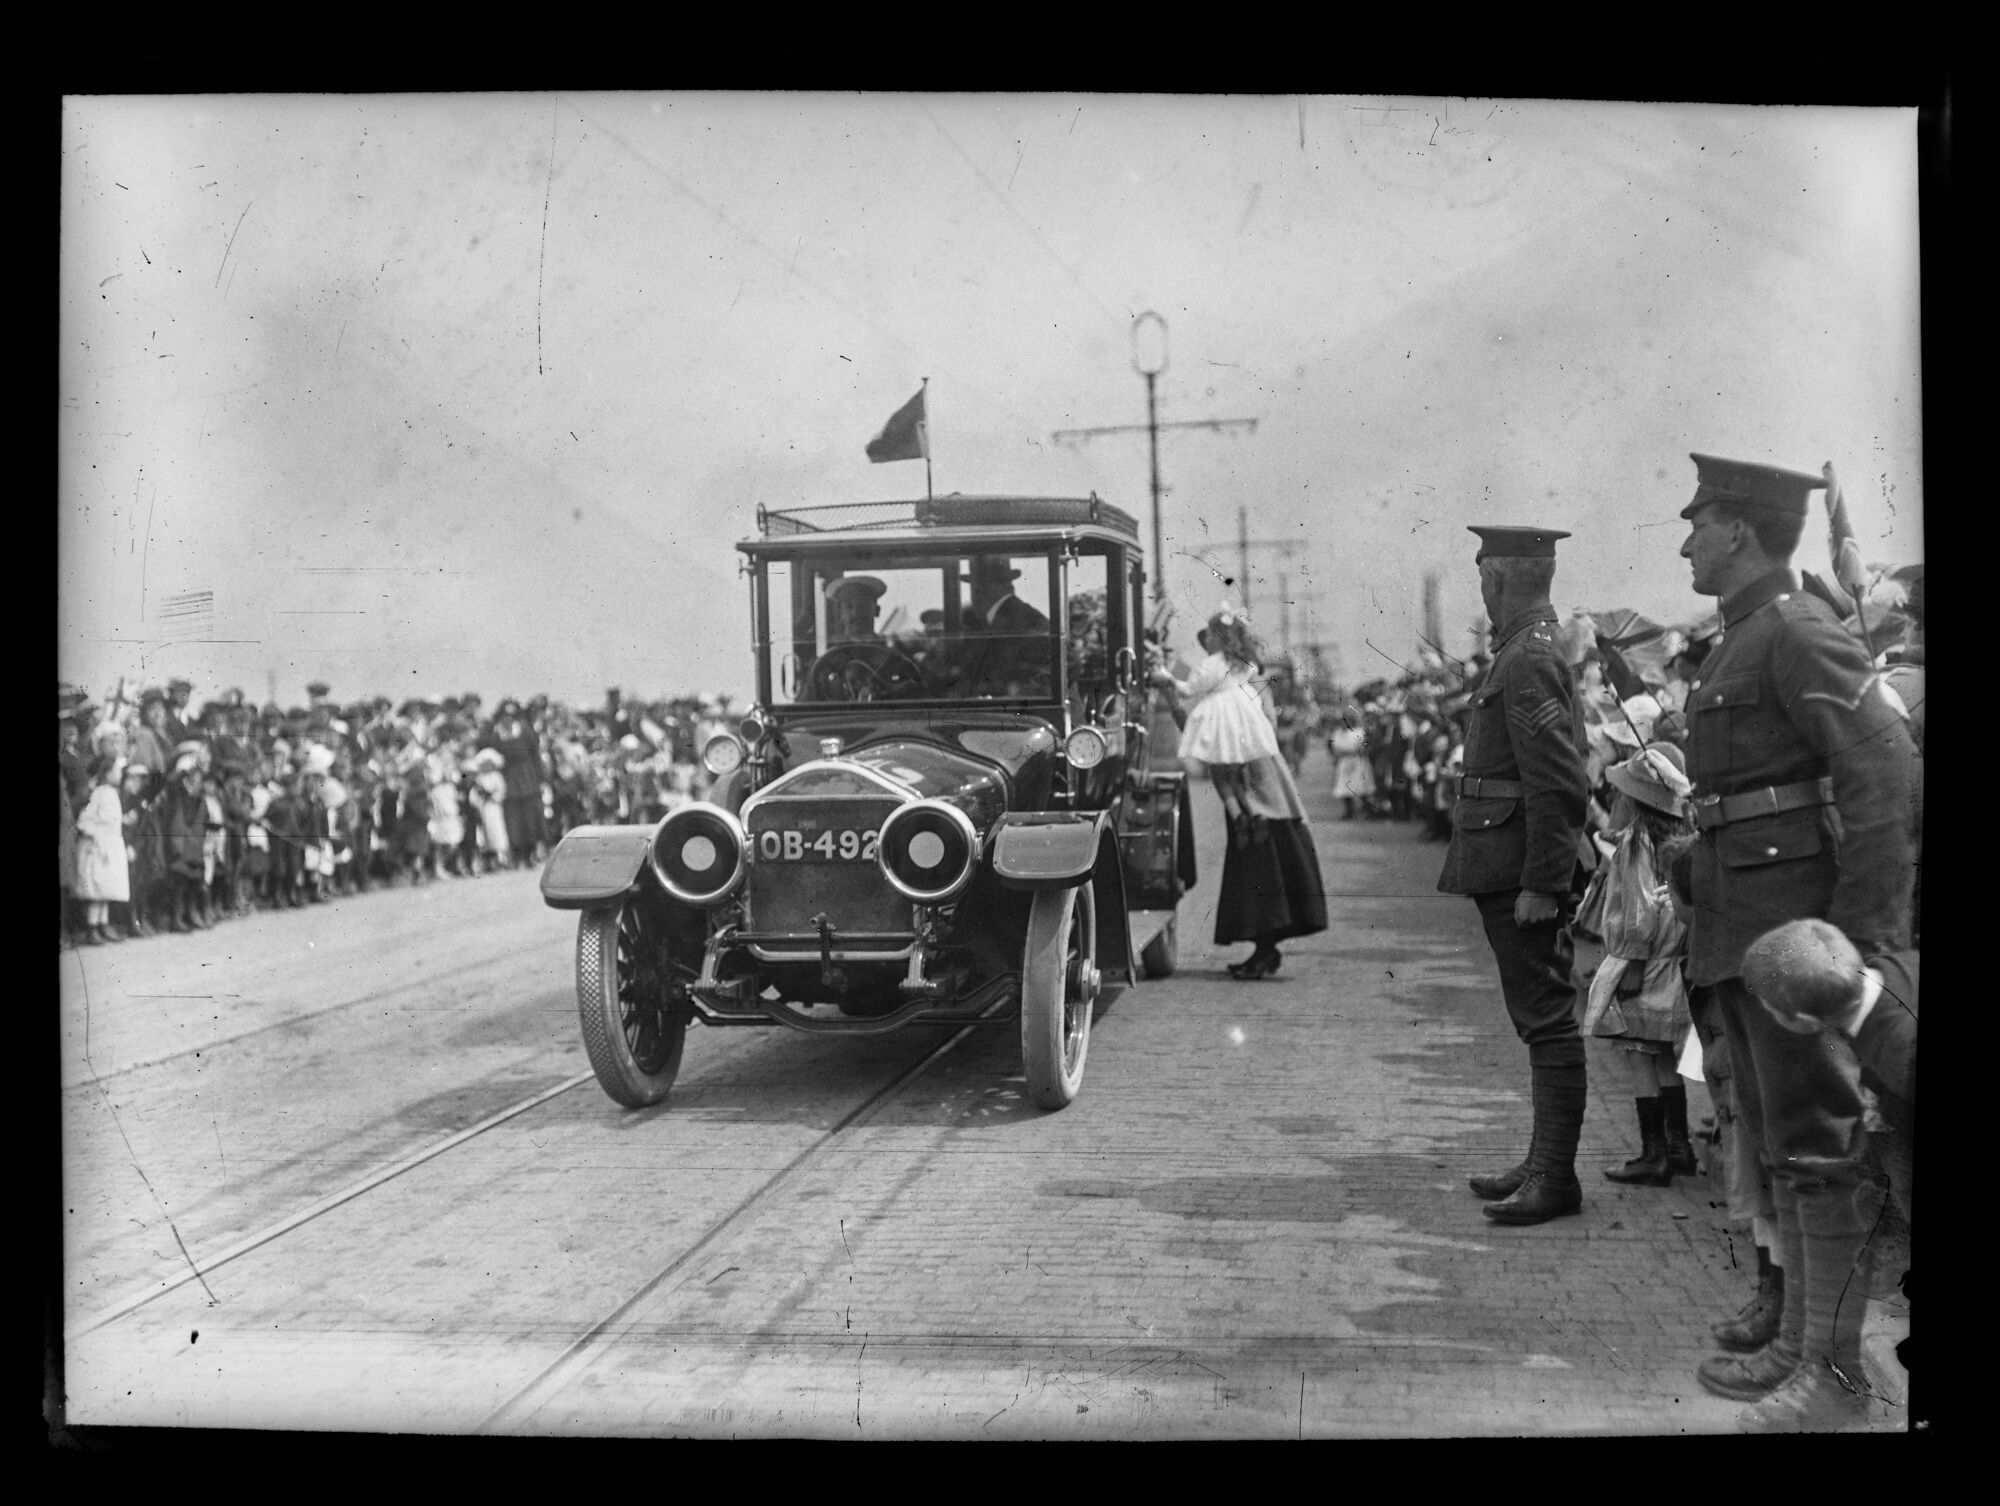 King George V visiting Barrow-in-Furness